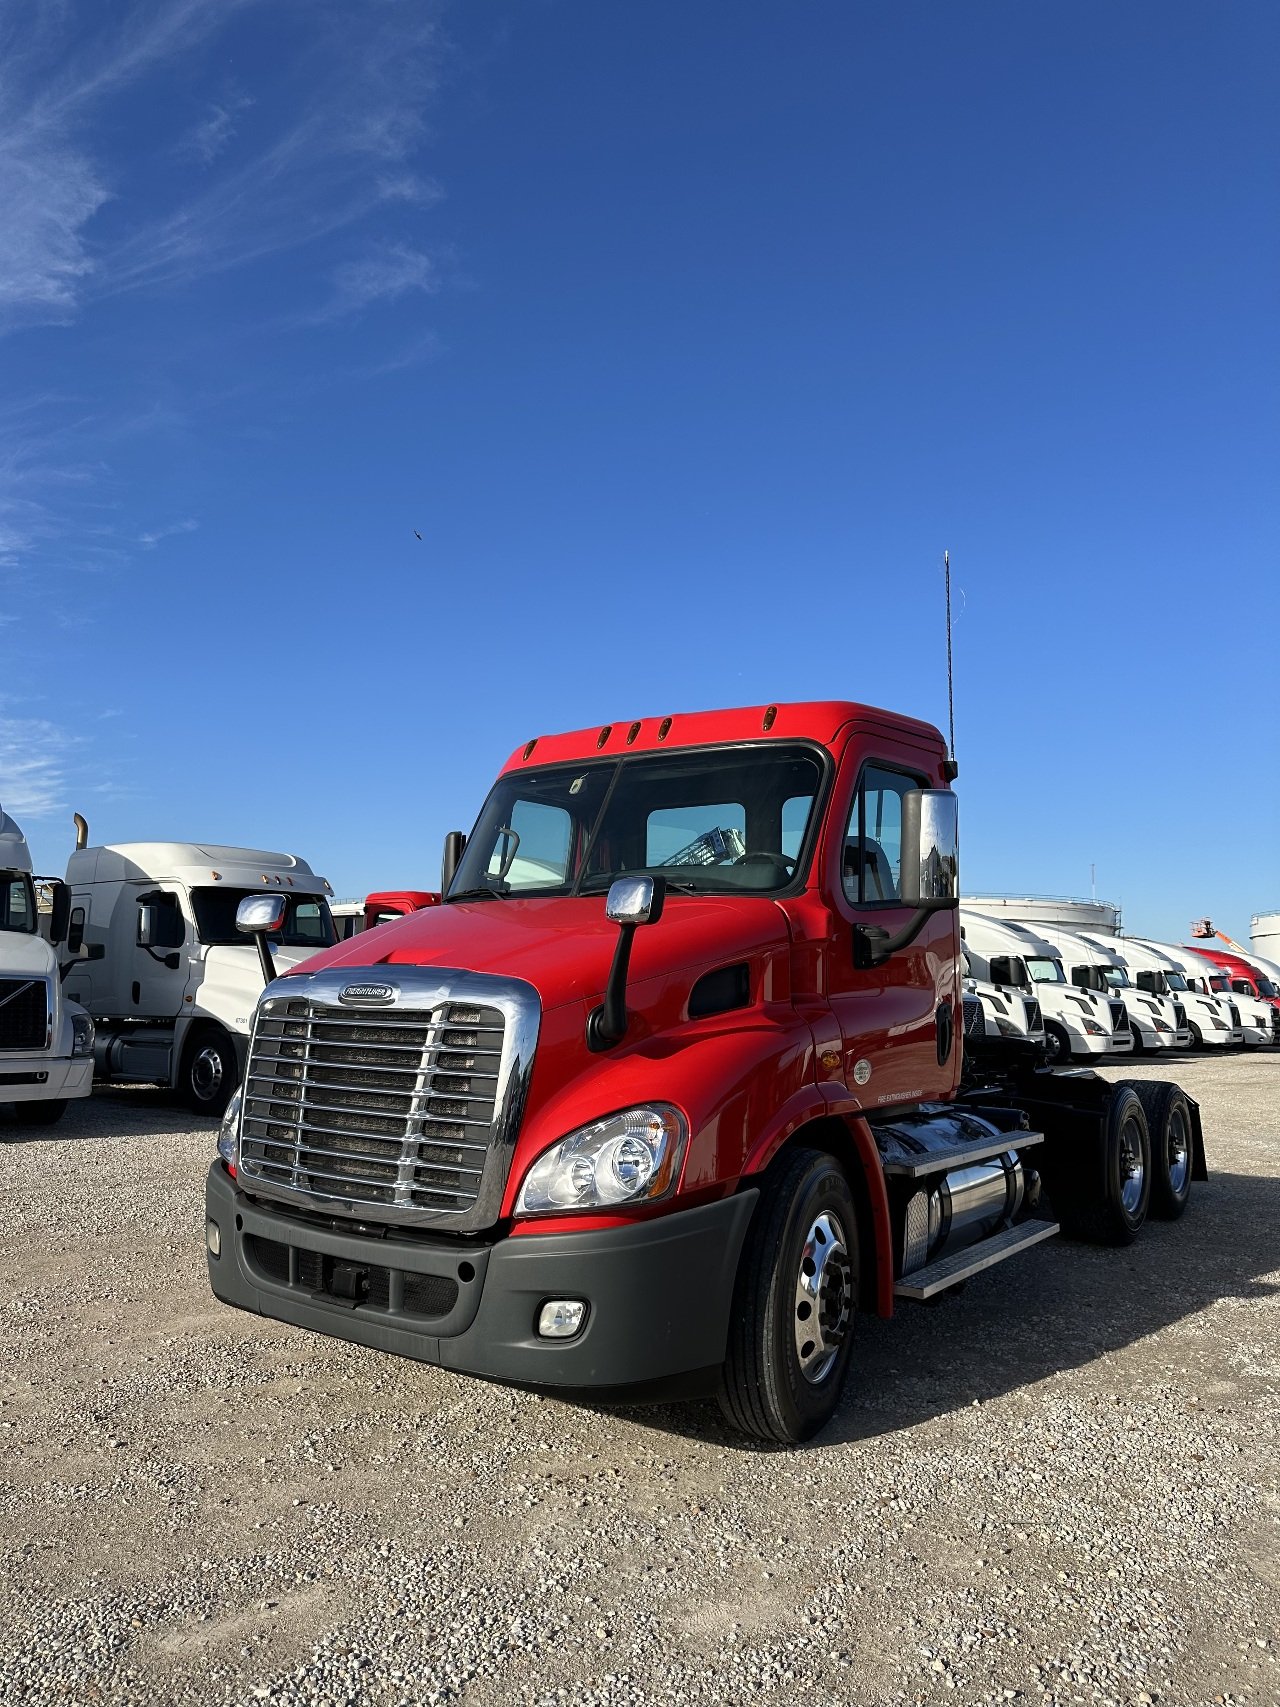 USED 2016 FREIGHTLINER CASCADIA DAYCAB TRUCK #3673